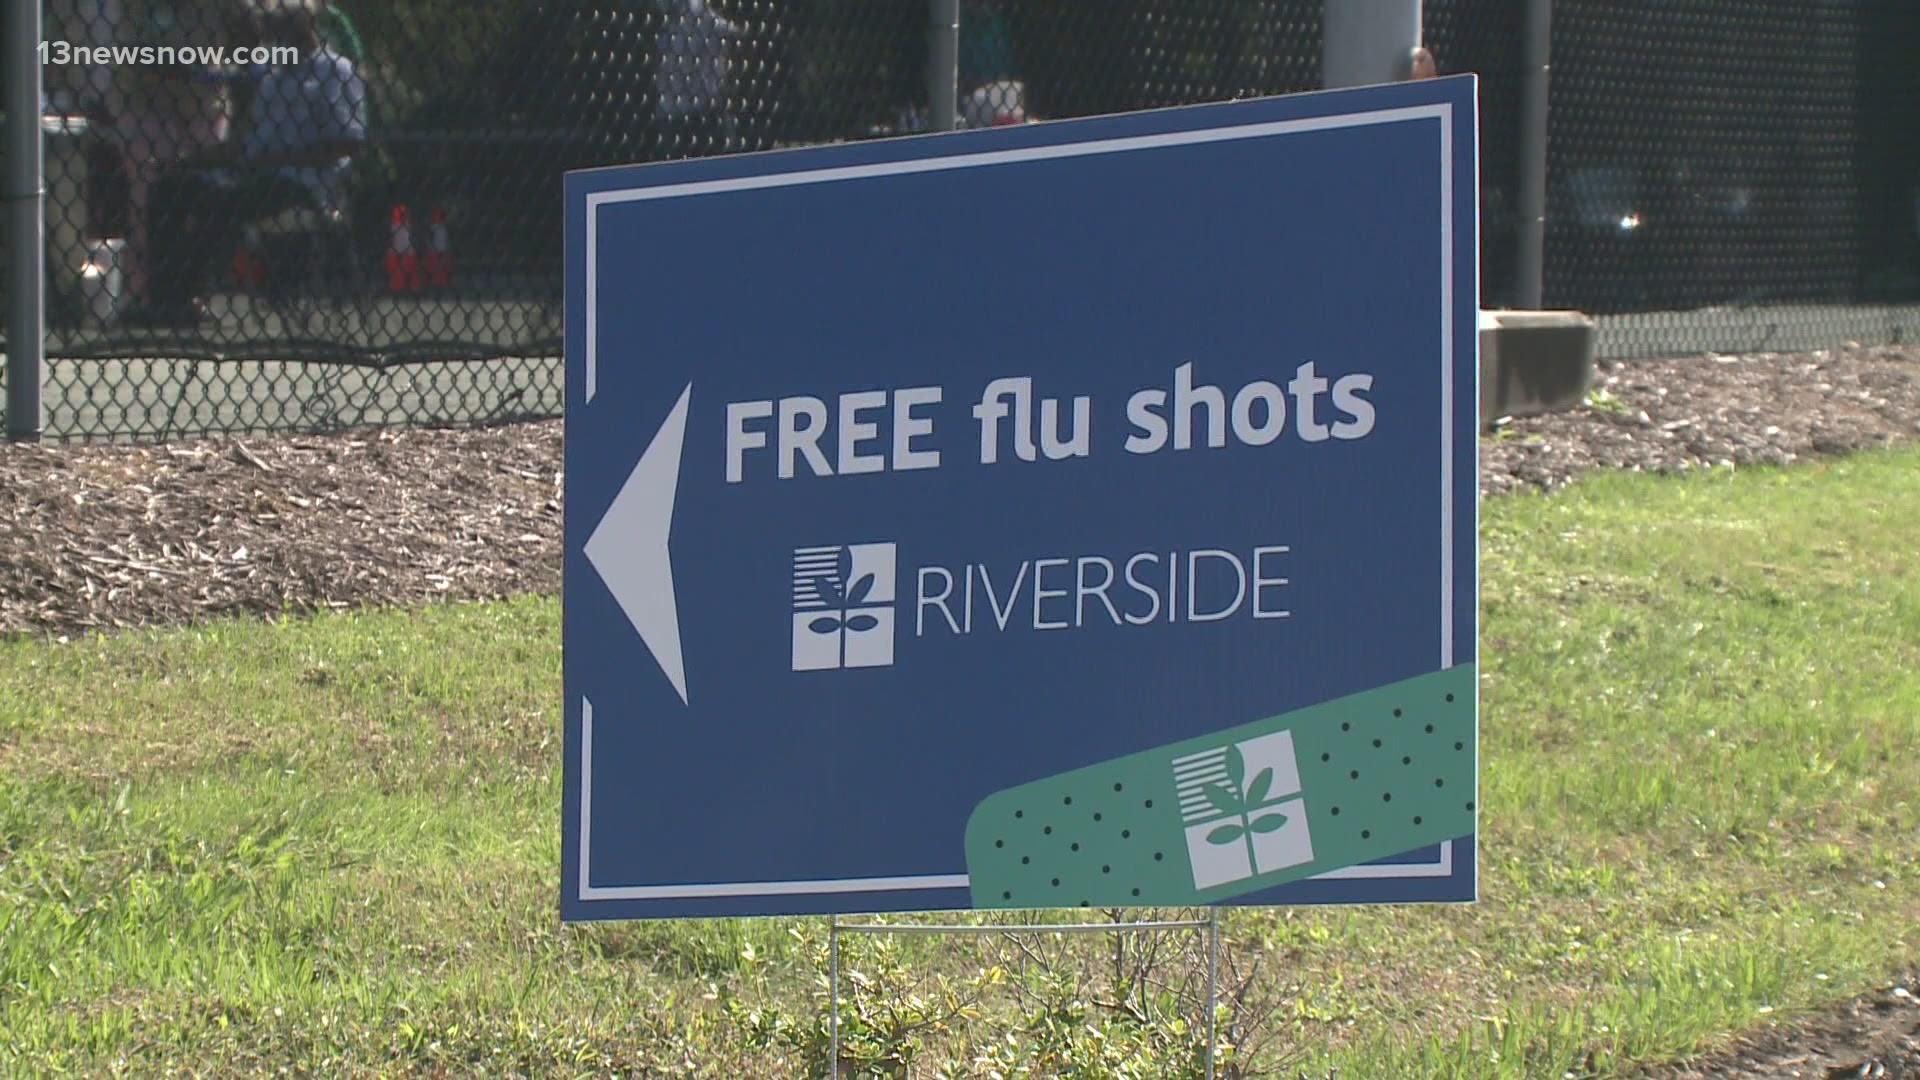 Organizers said they're stepping up the number of flu shots available to the public this year, to cut back on the risks of a bad flu season coinciding with COVID-19.